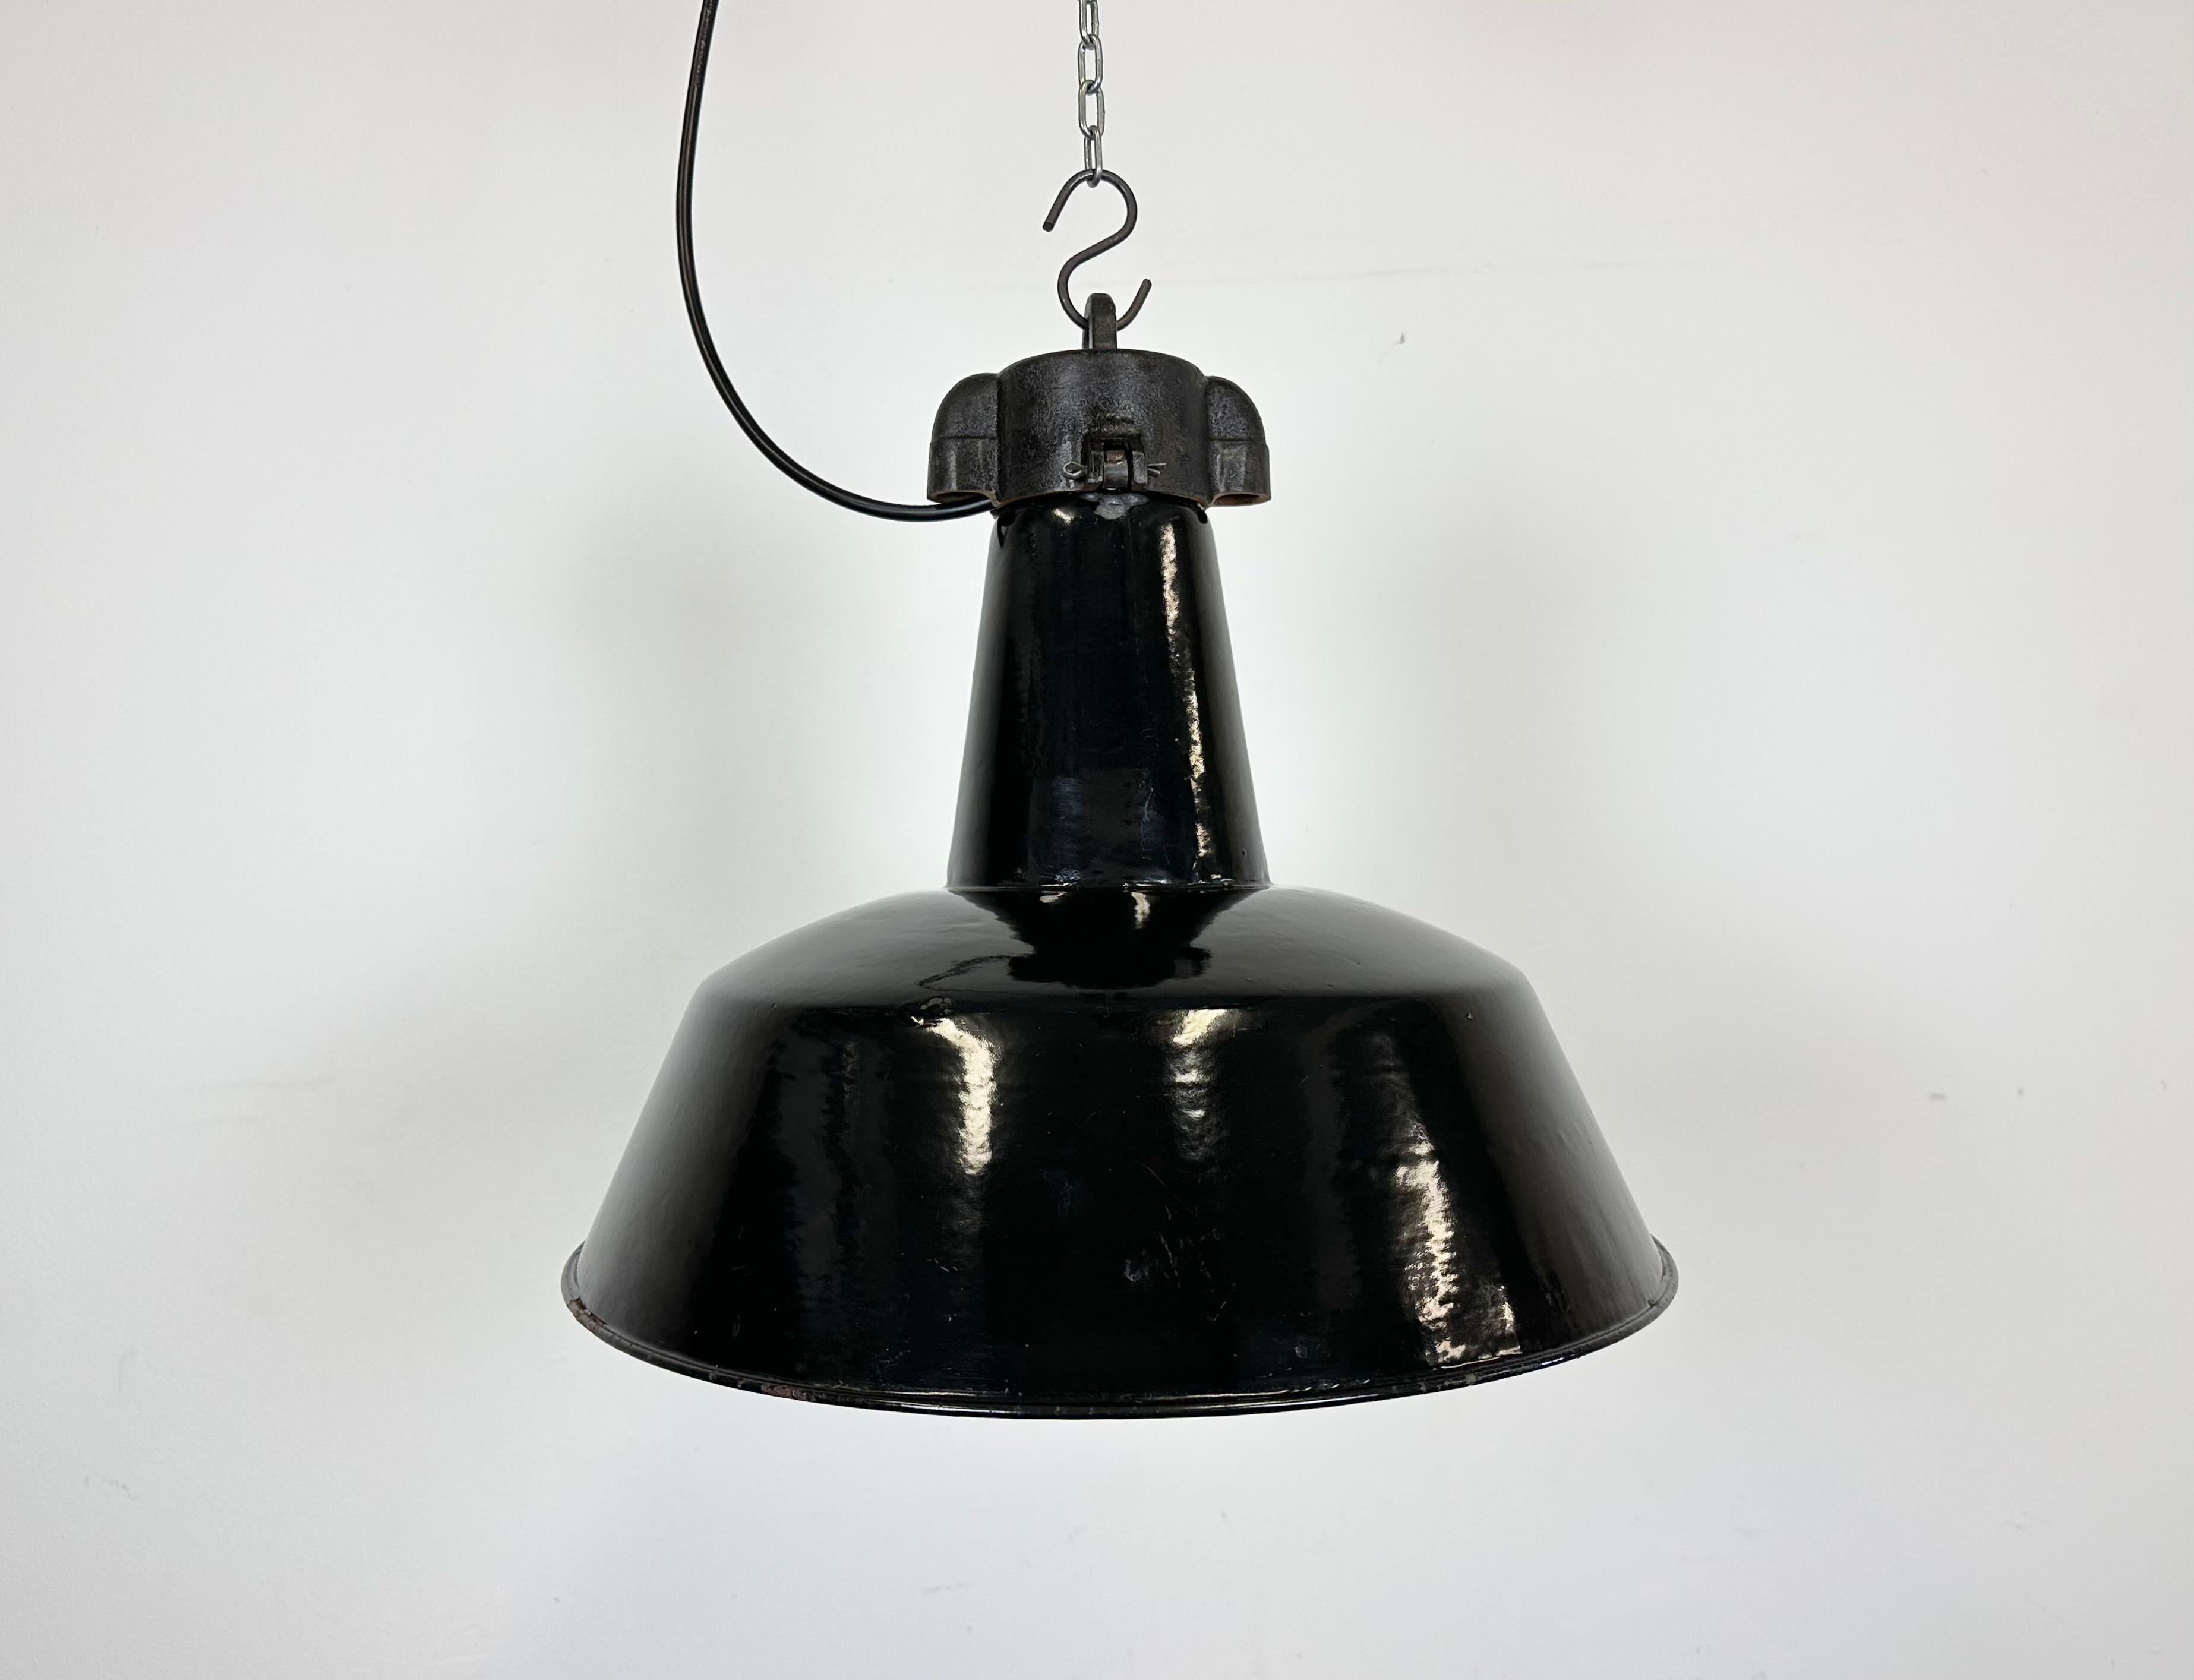 Industrial black enamel pendant light made by Elektrosvit in former Czechoslovakia during the 1950s. White enamel inside the shade. Cast iron top. The porcelain socket requires E 27/ E26 light bulbs. New wire. Fully functional. The weight of the